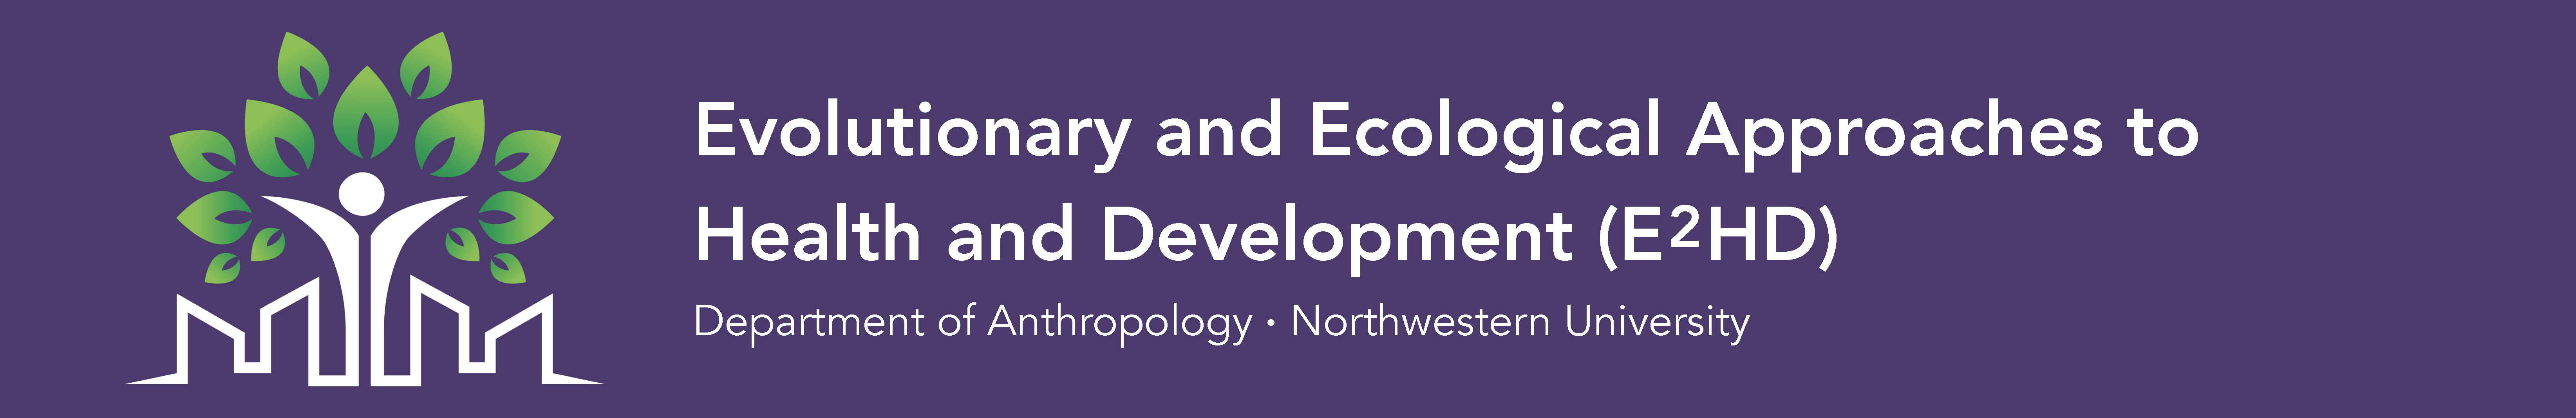 Evolutionary & Ecological Approaches to Health and Development